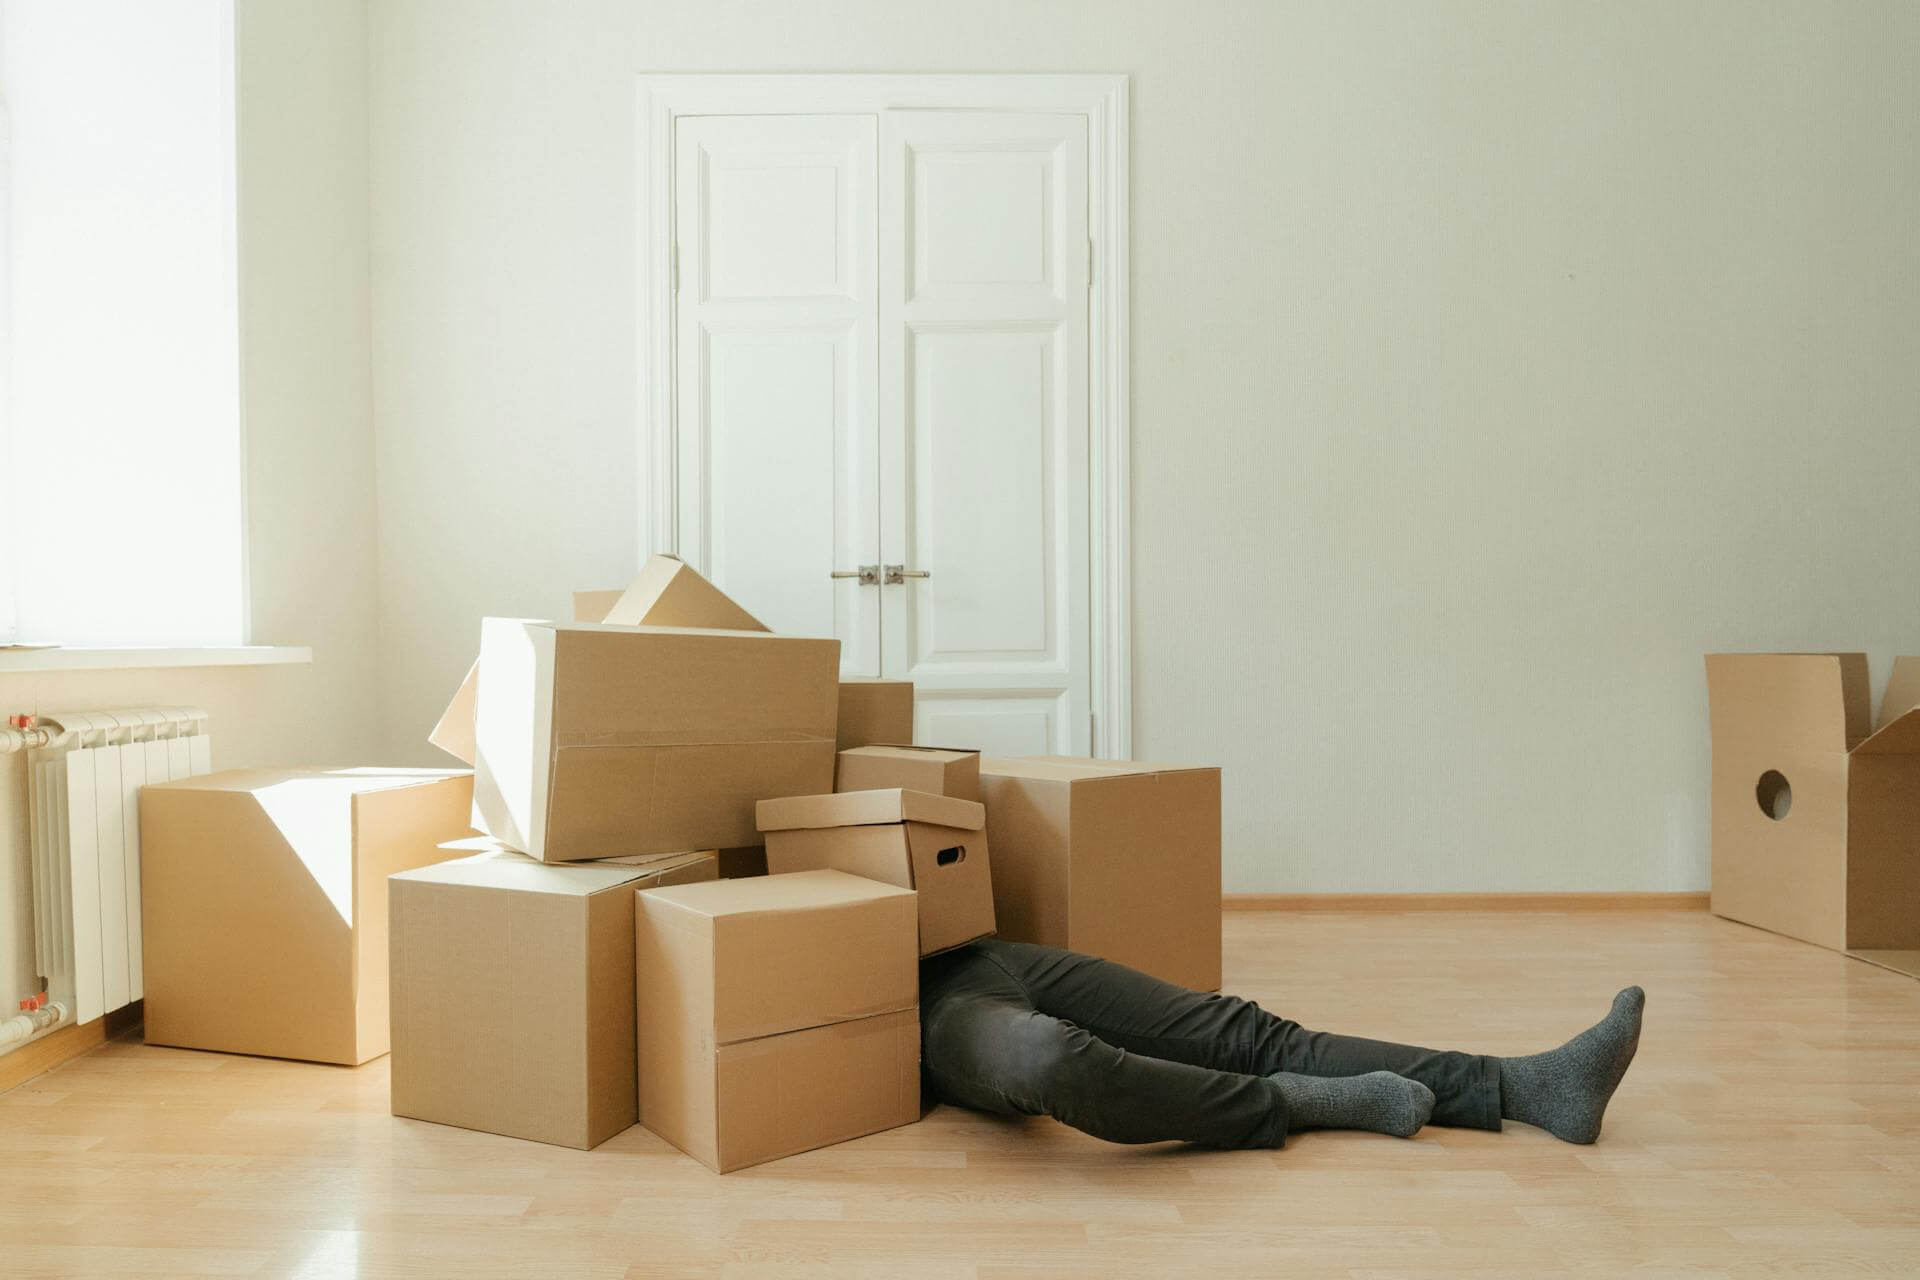 Man Lying on Floor with Boxes